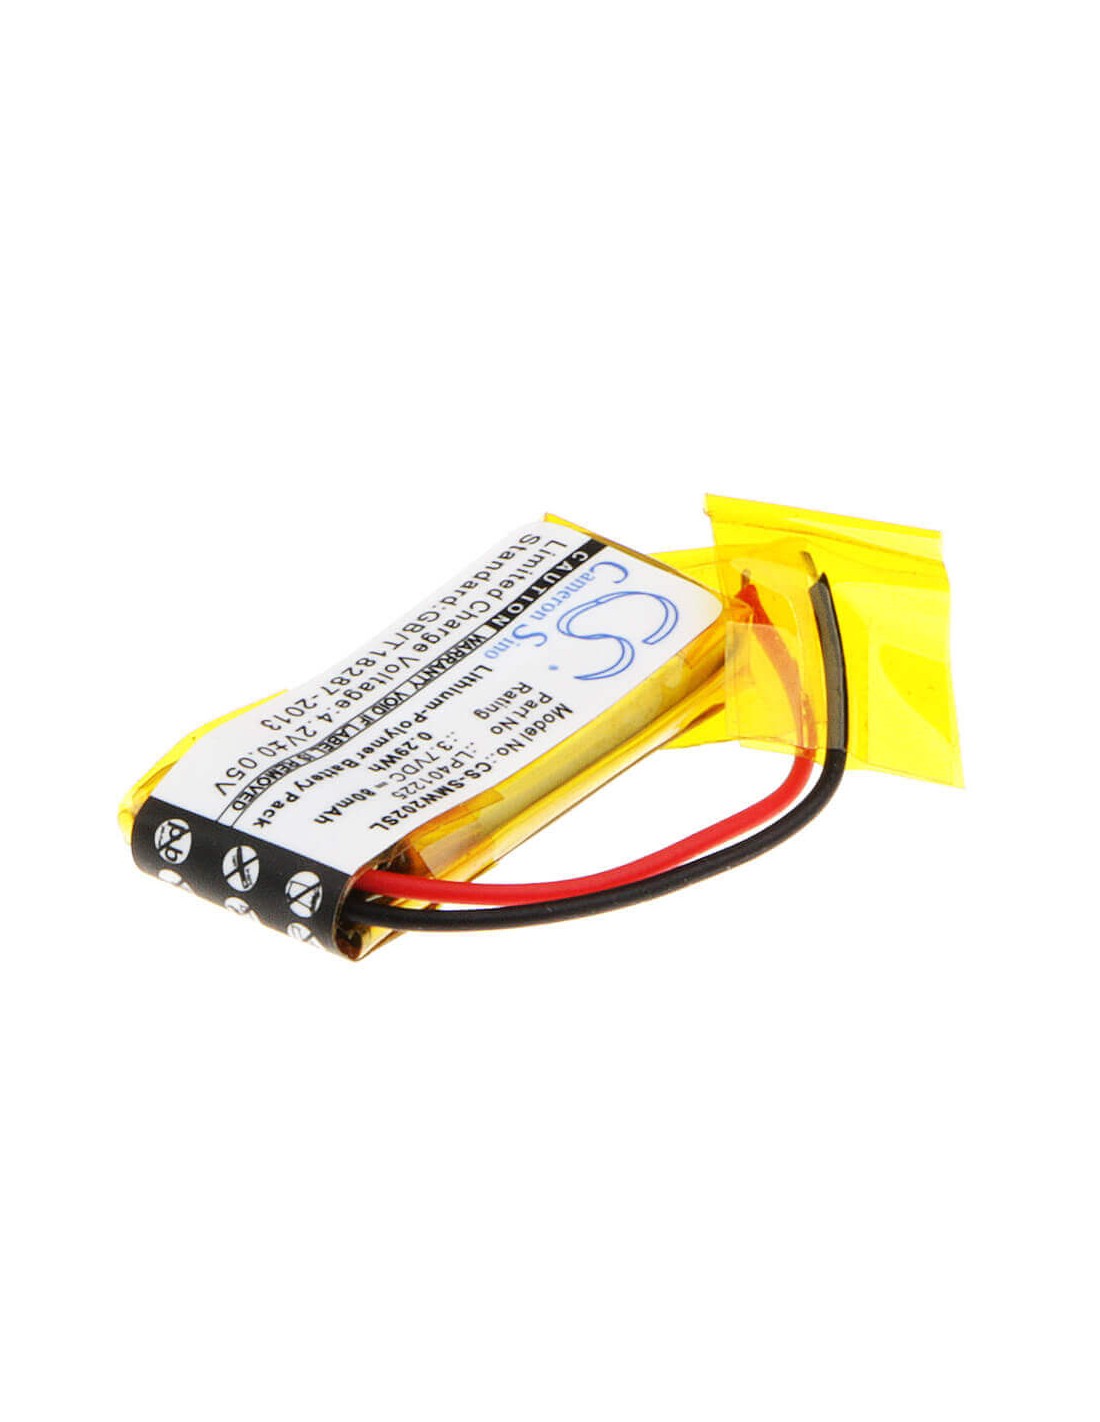 Battery for Sony Nwz-w202 3.7V, 80mAh - 0.30Wh